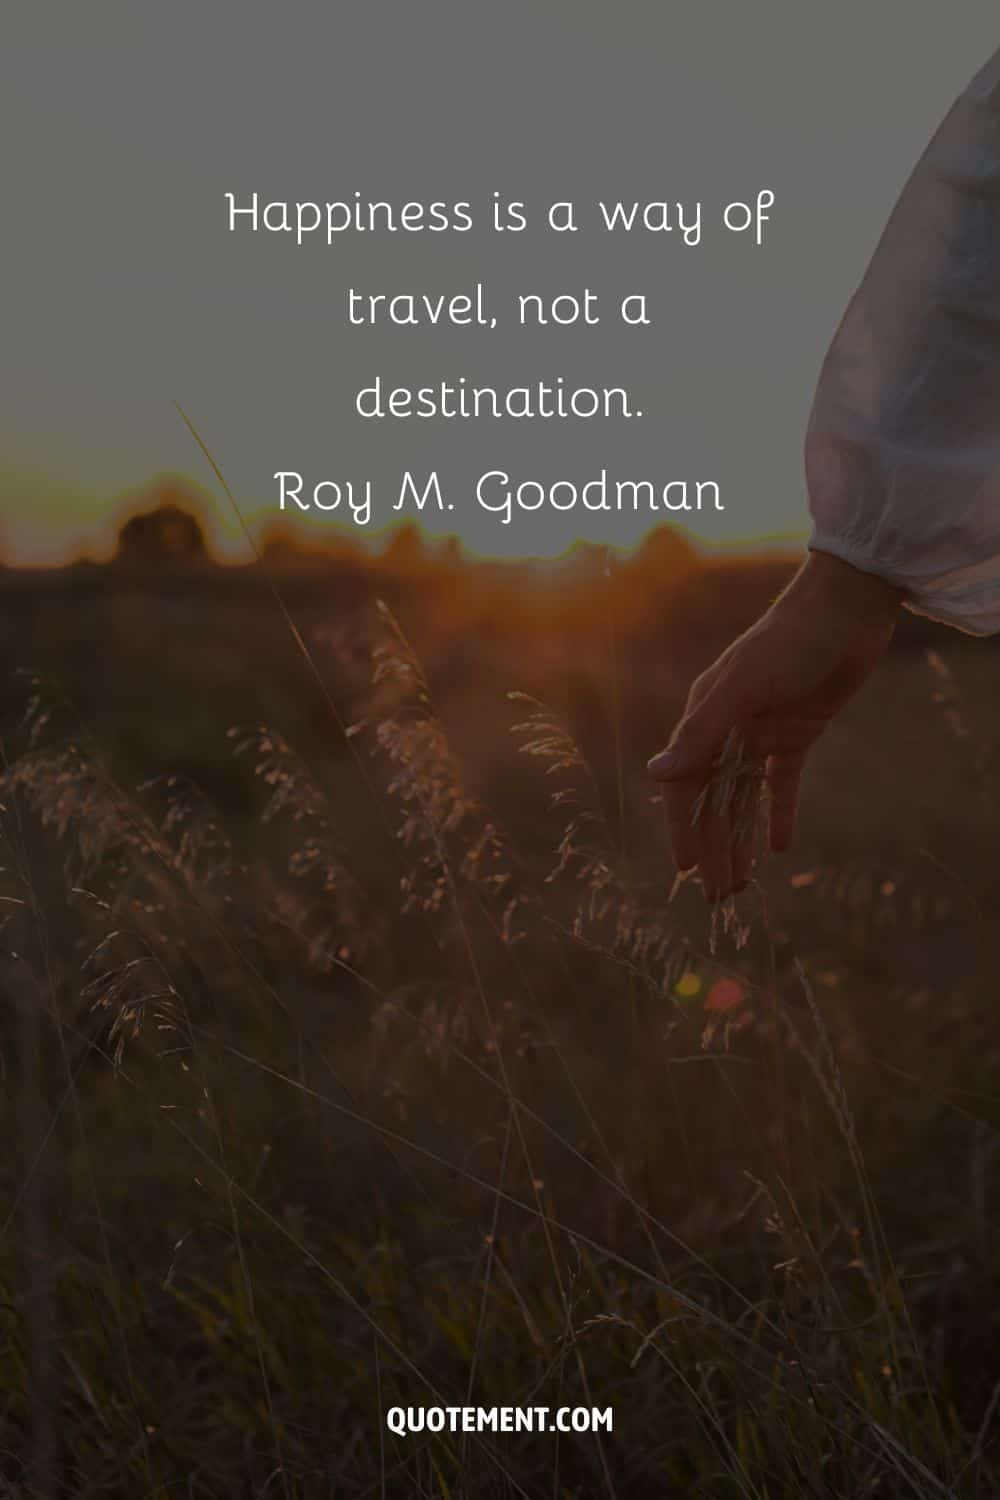 Happiness is a way of travel, not a destination. – Roy M. Goodman.